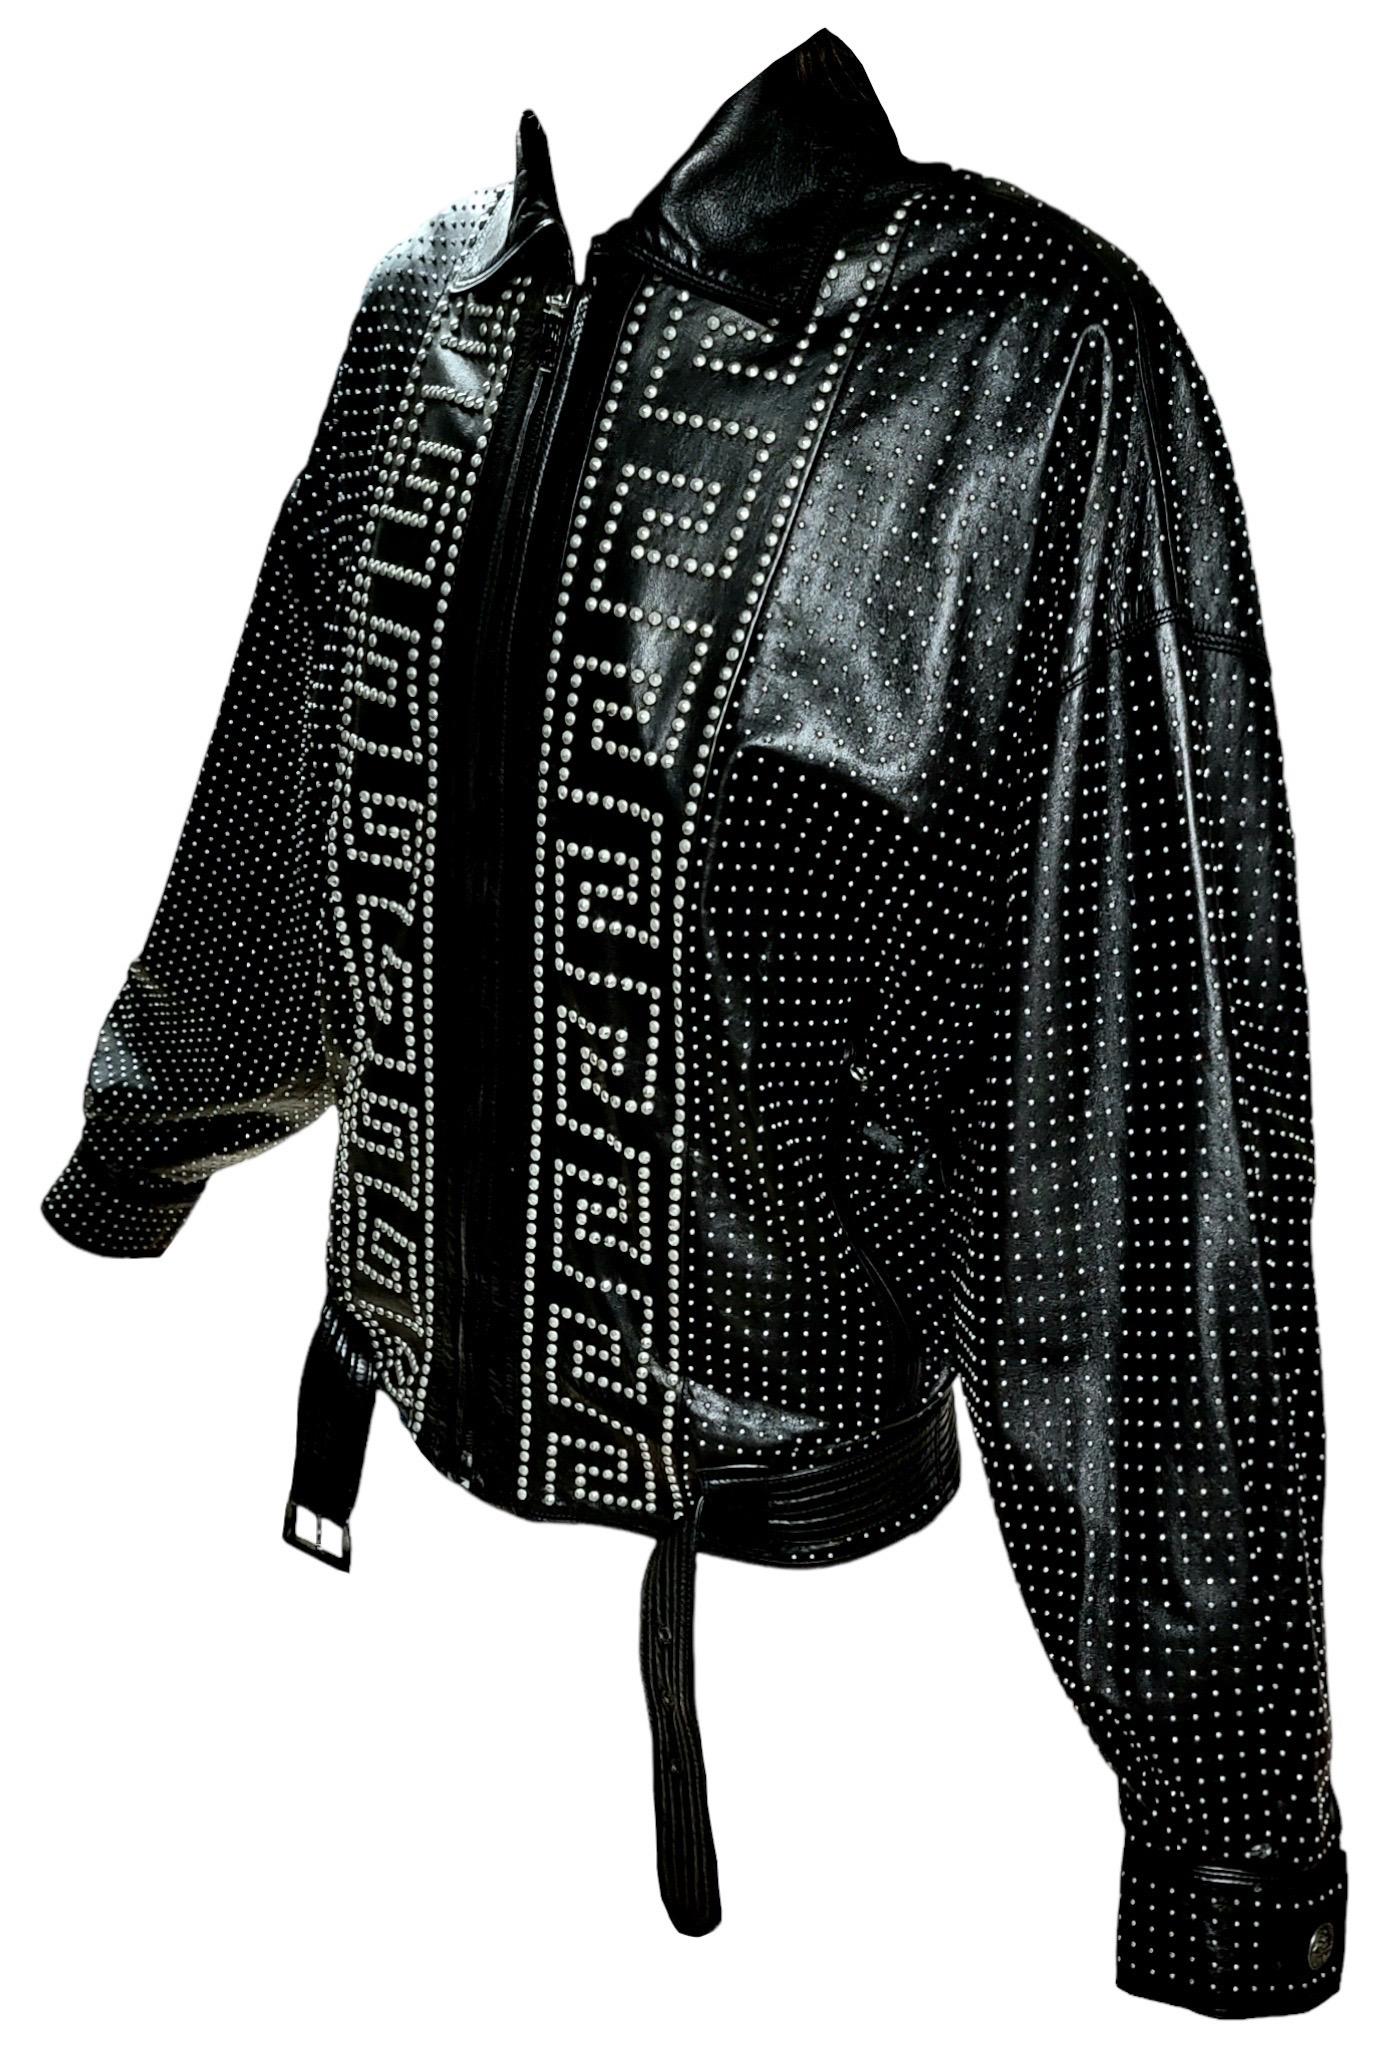 Men's S/S 1992 Gianni Versace Greek Key Studded Leather Jacket For Sale